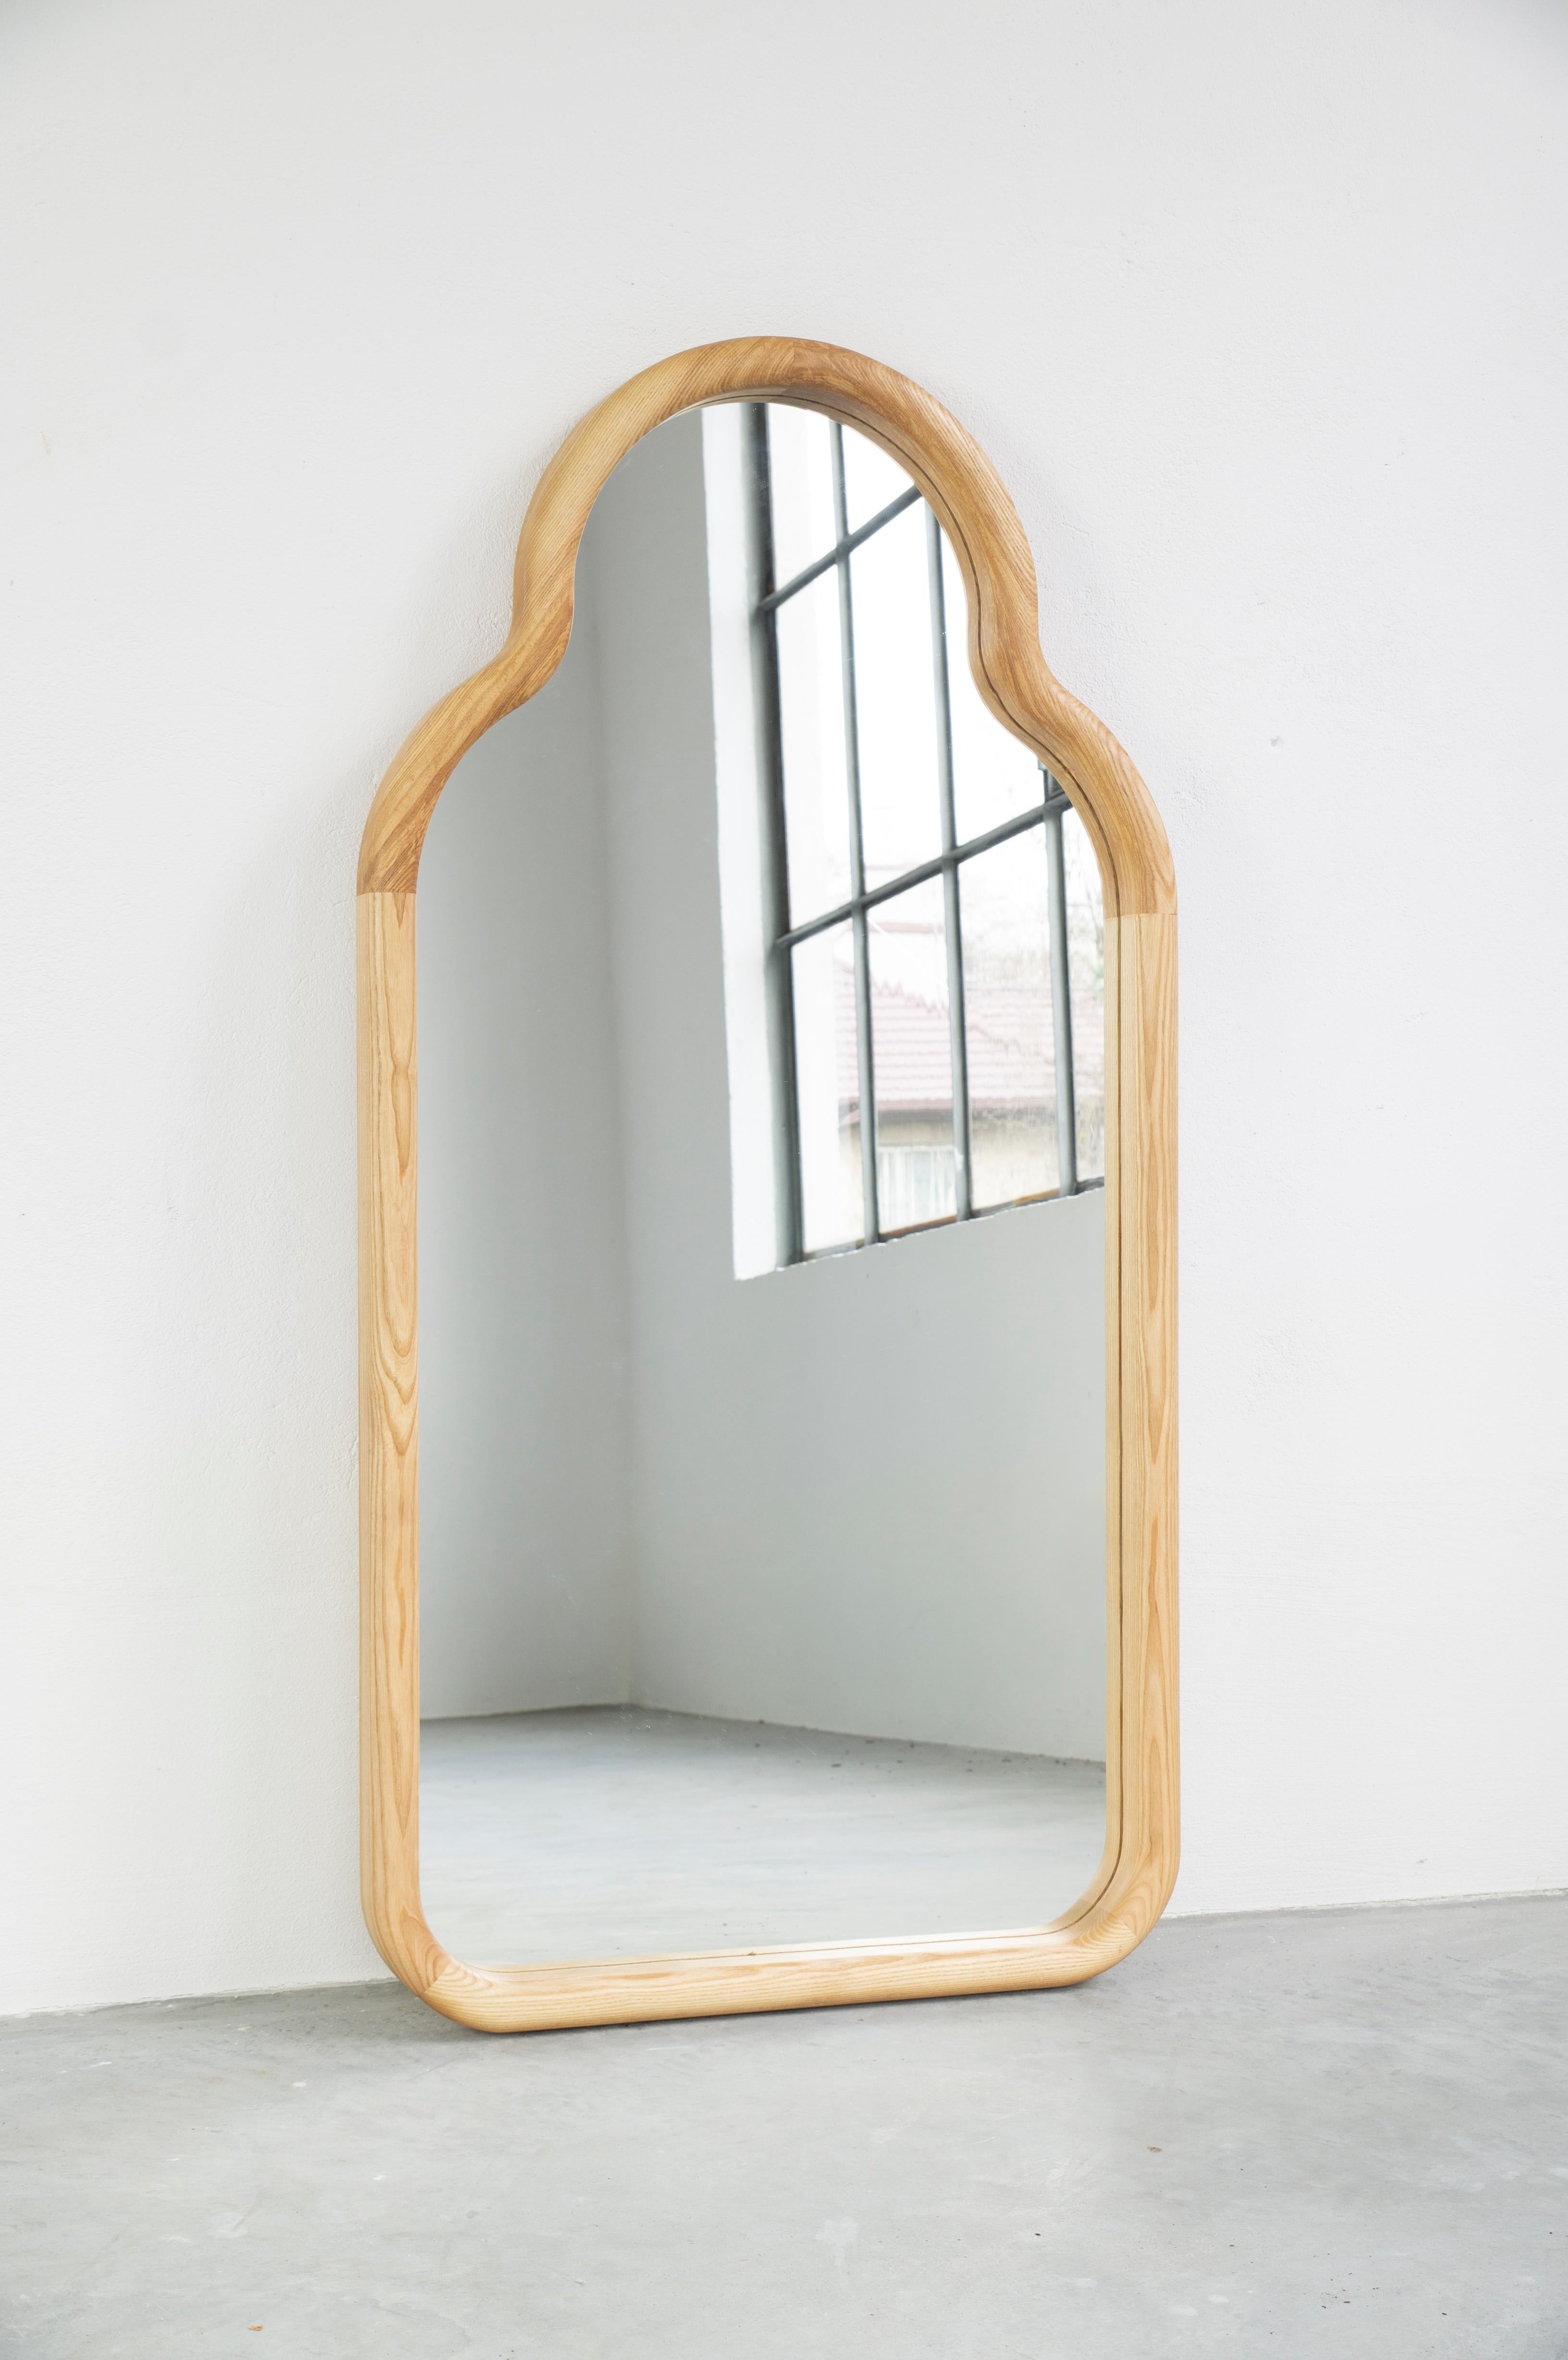 TRN S Floor mirror
Signed by Pani Jurek

Dimensions: H100 x 41,5 x 5
Materials: Solid ash wood, hand stained
Colors: red, blue, green, natural
_________________________________

Pani Jurek is a Polish design studio founded by artist and designer